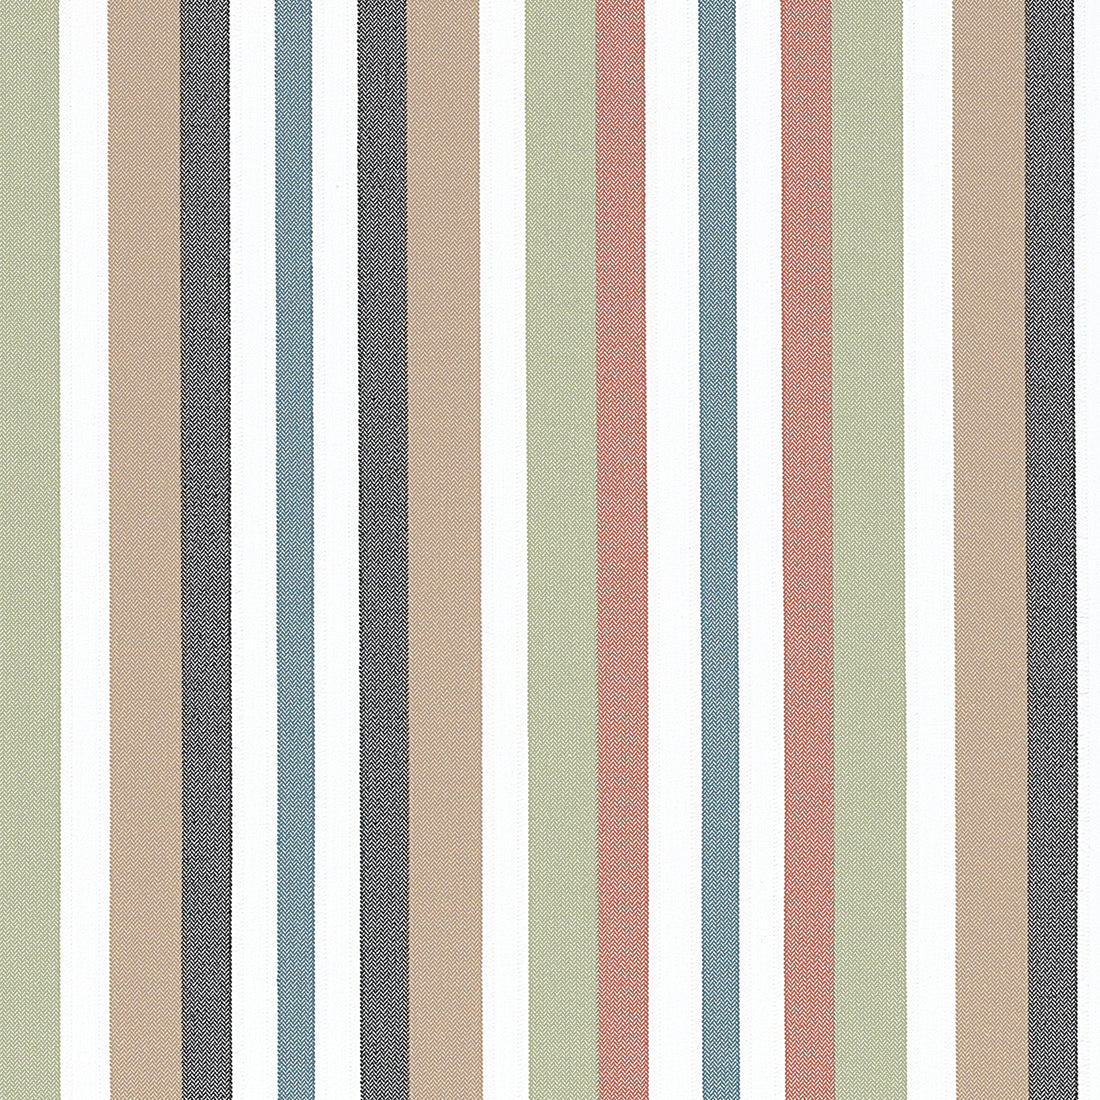 Kalea Stripe fabric in desert color - pattern number W81671 - by Thibaut in the Locale collection